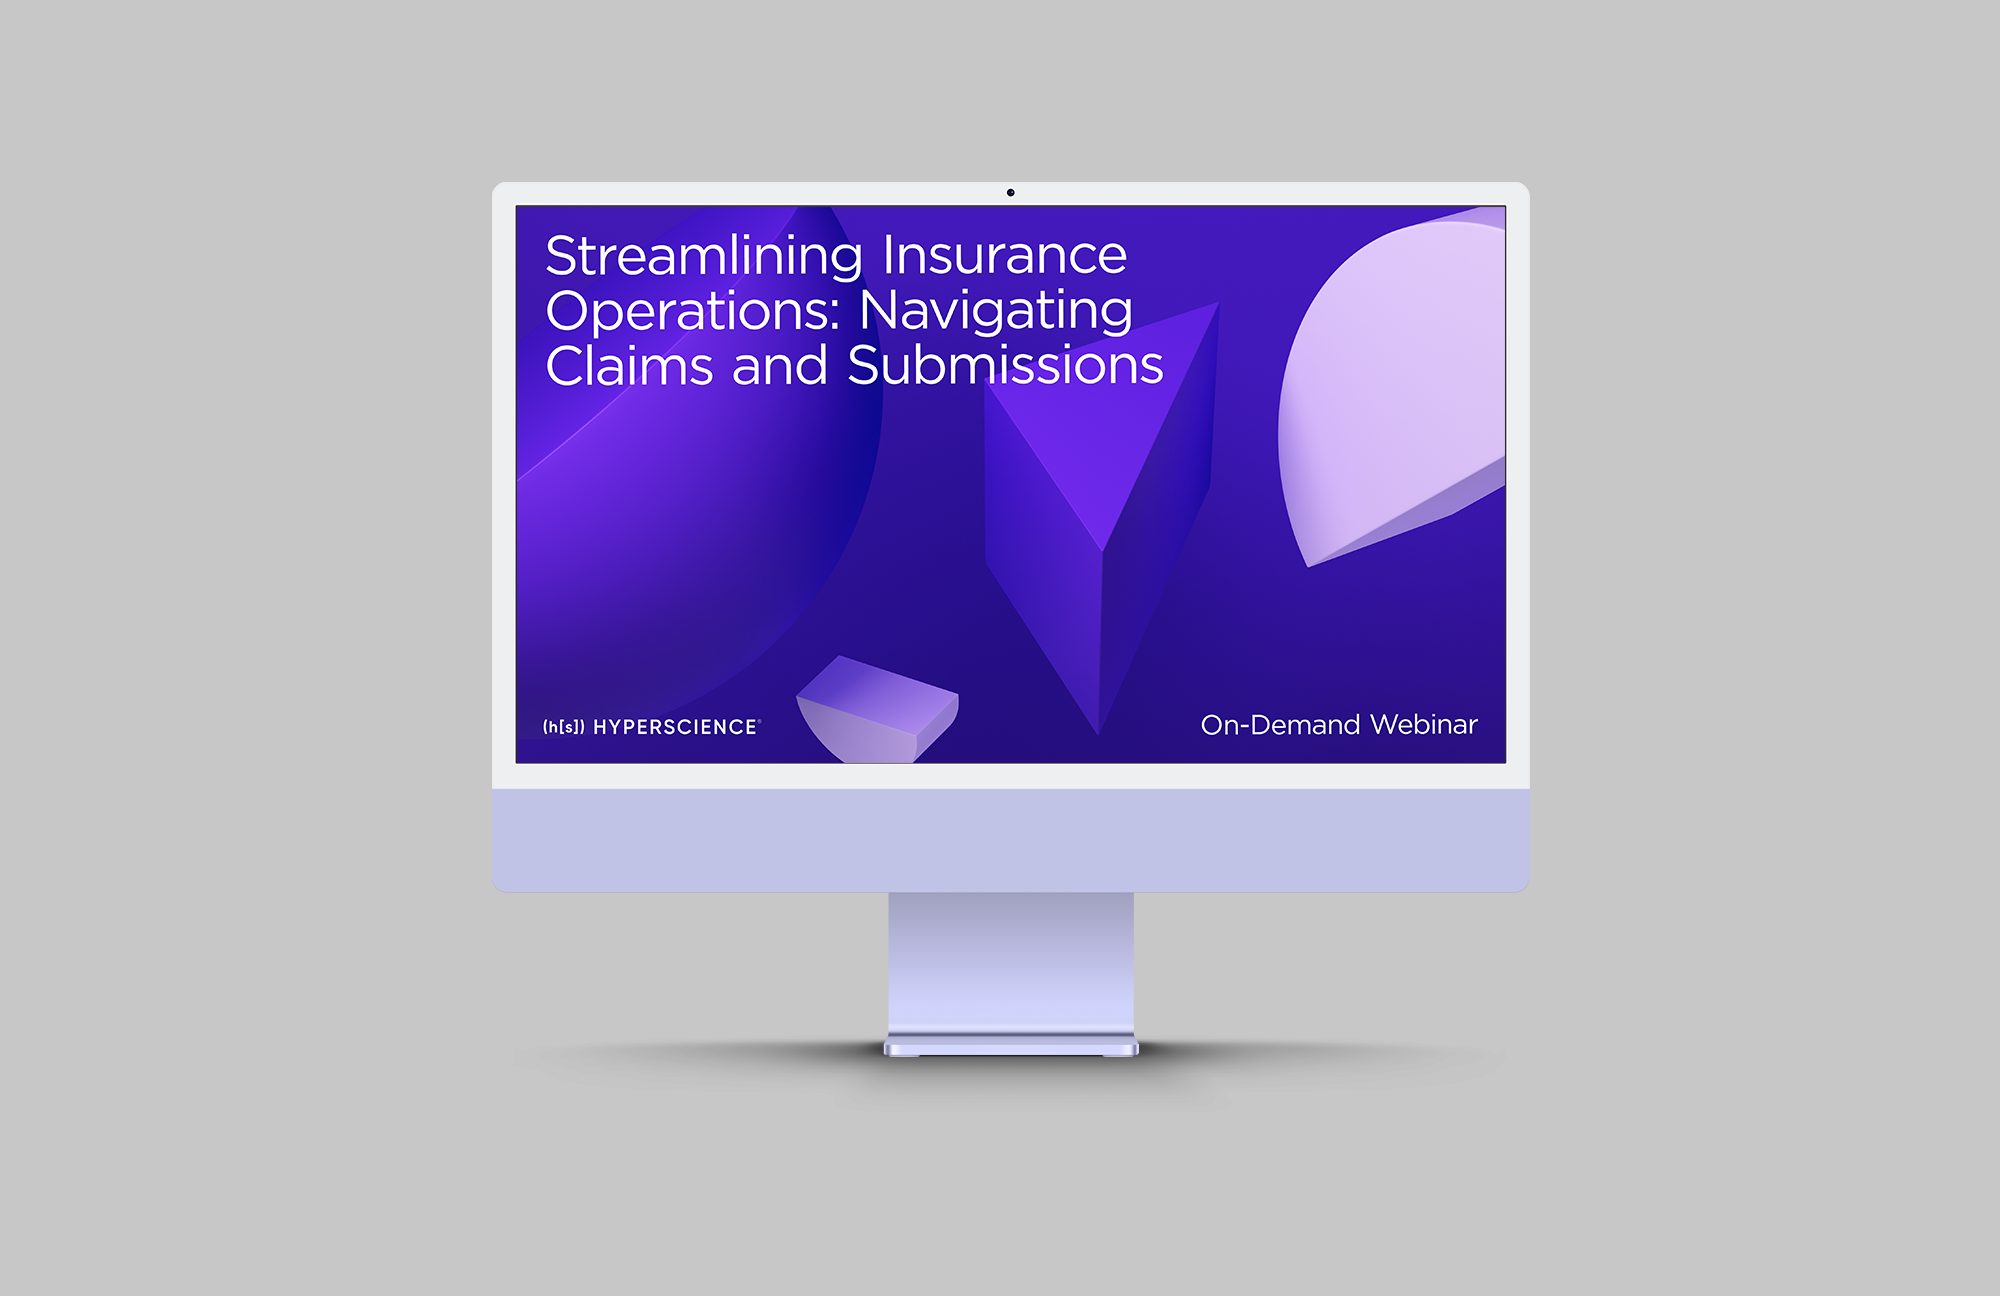 Streamlining Insurance Operations: Navigating Claims & Submissions